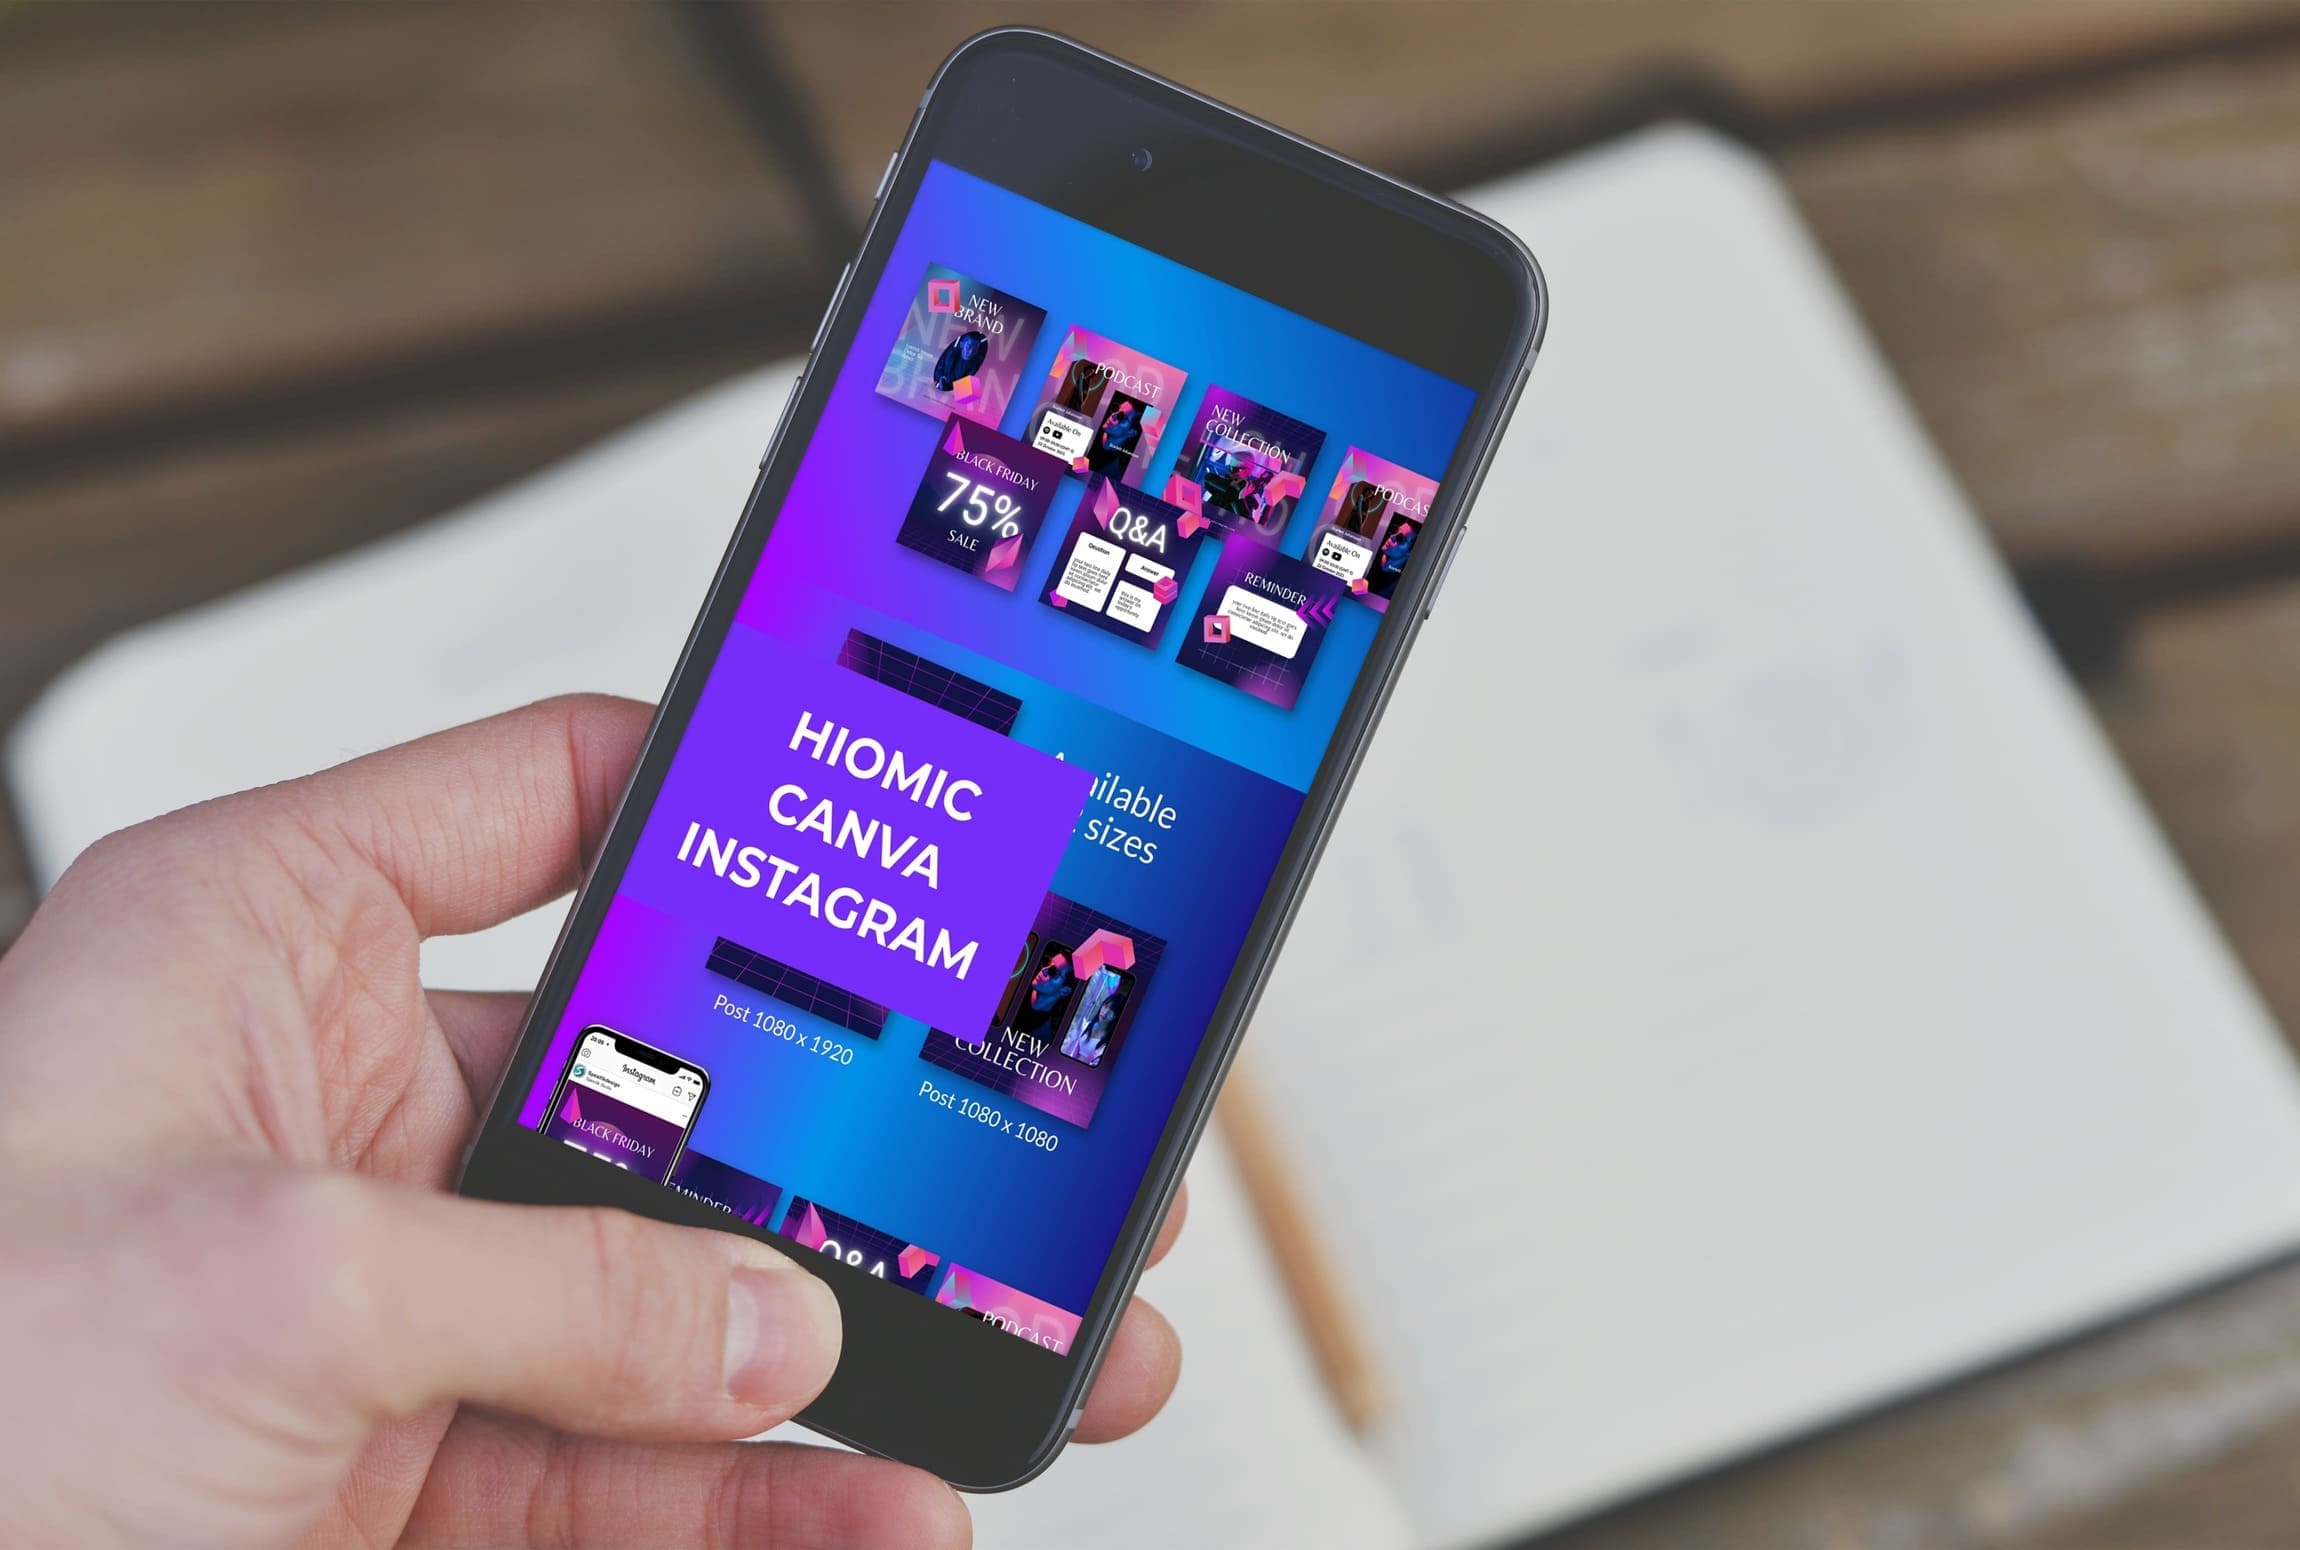 Hiomic Canva Instagram Preview On The Mobile.